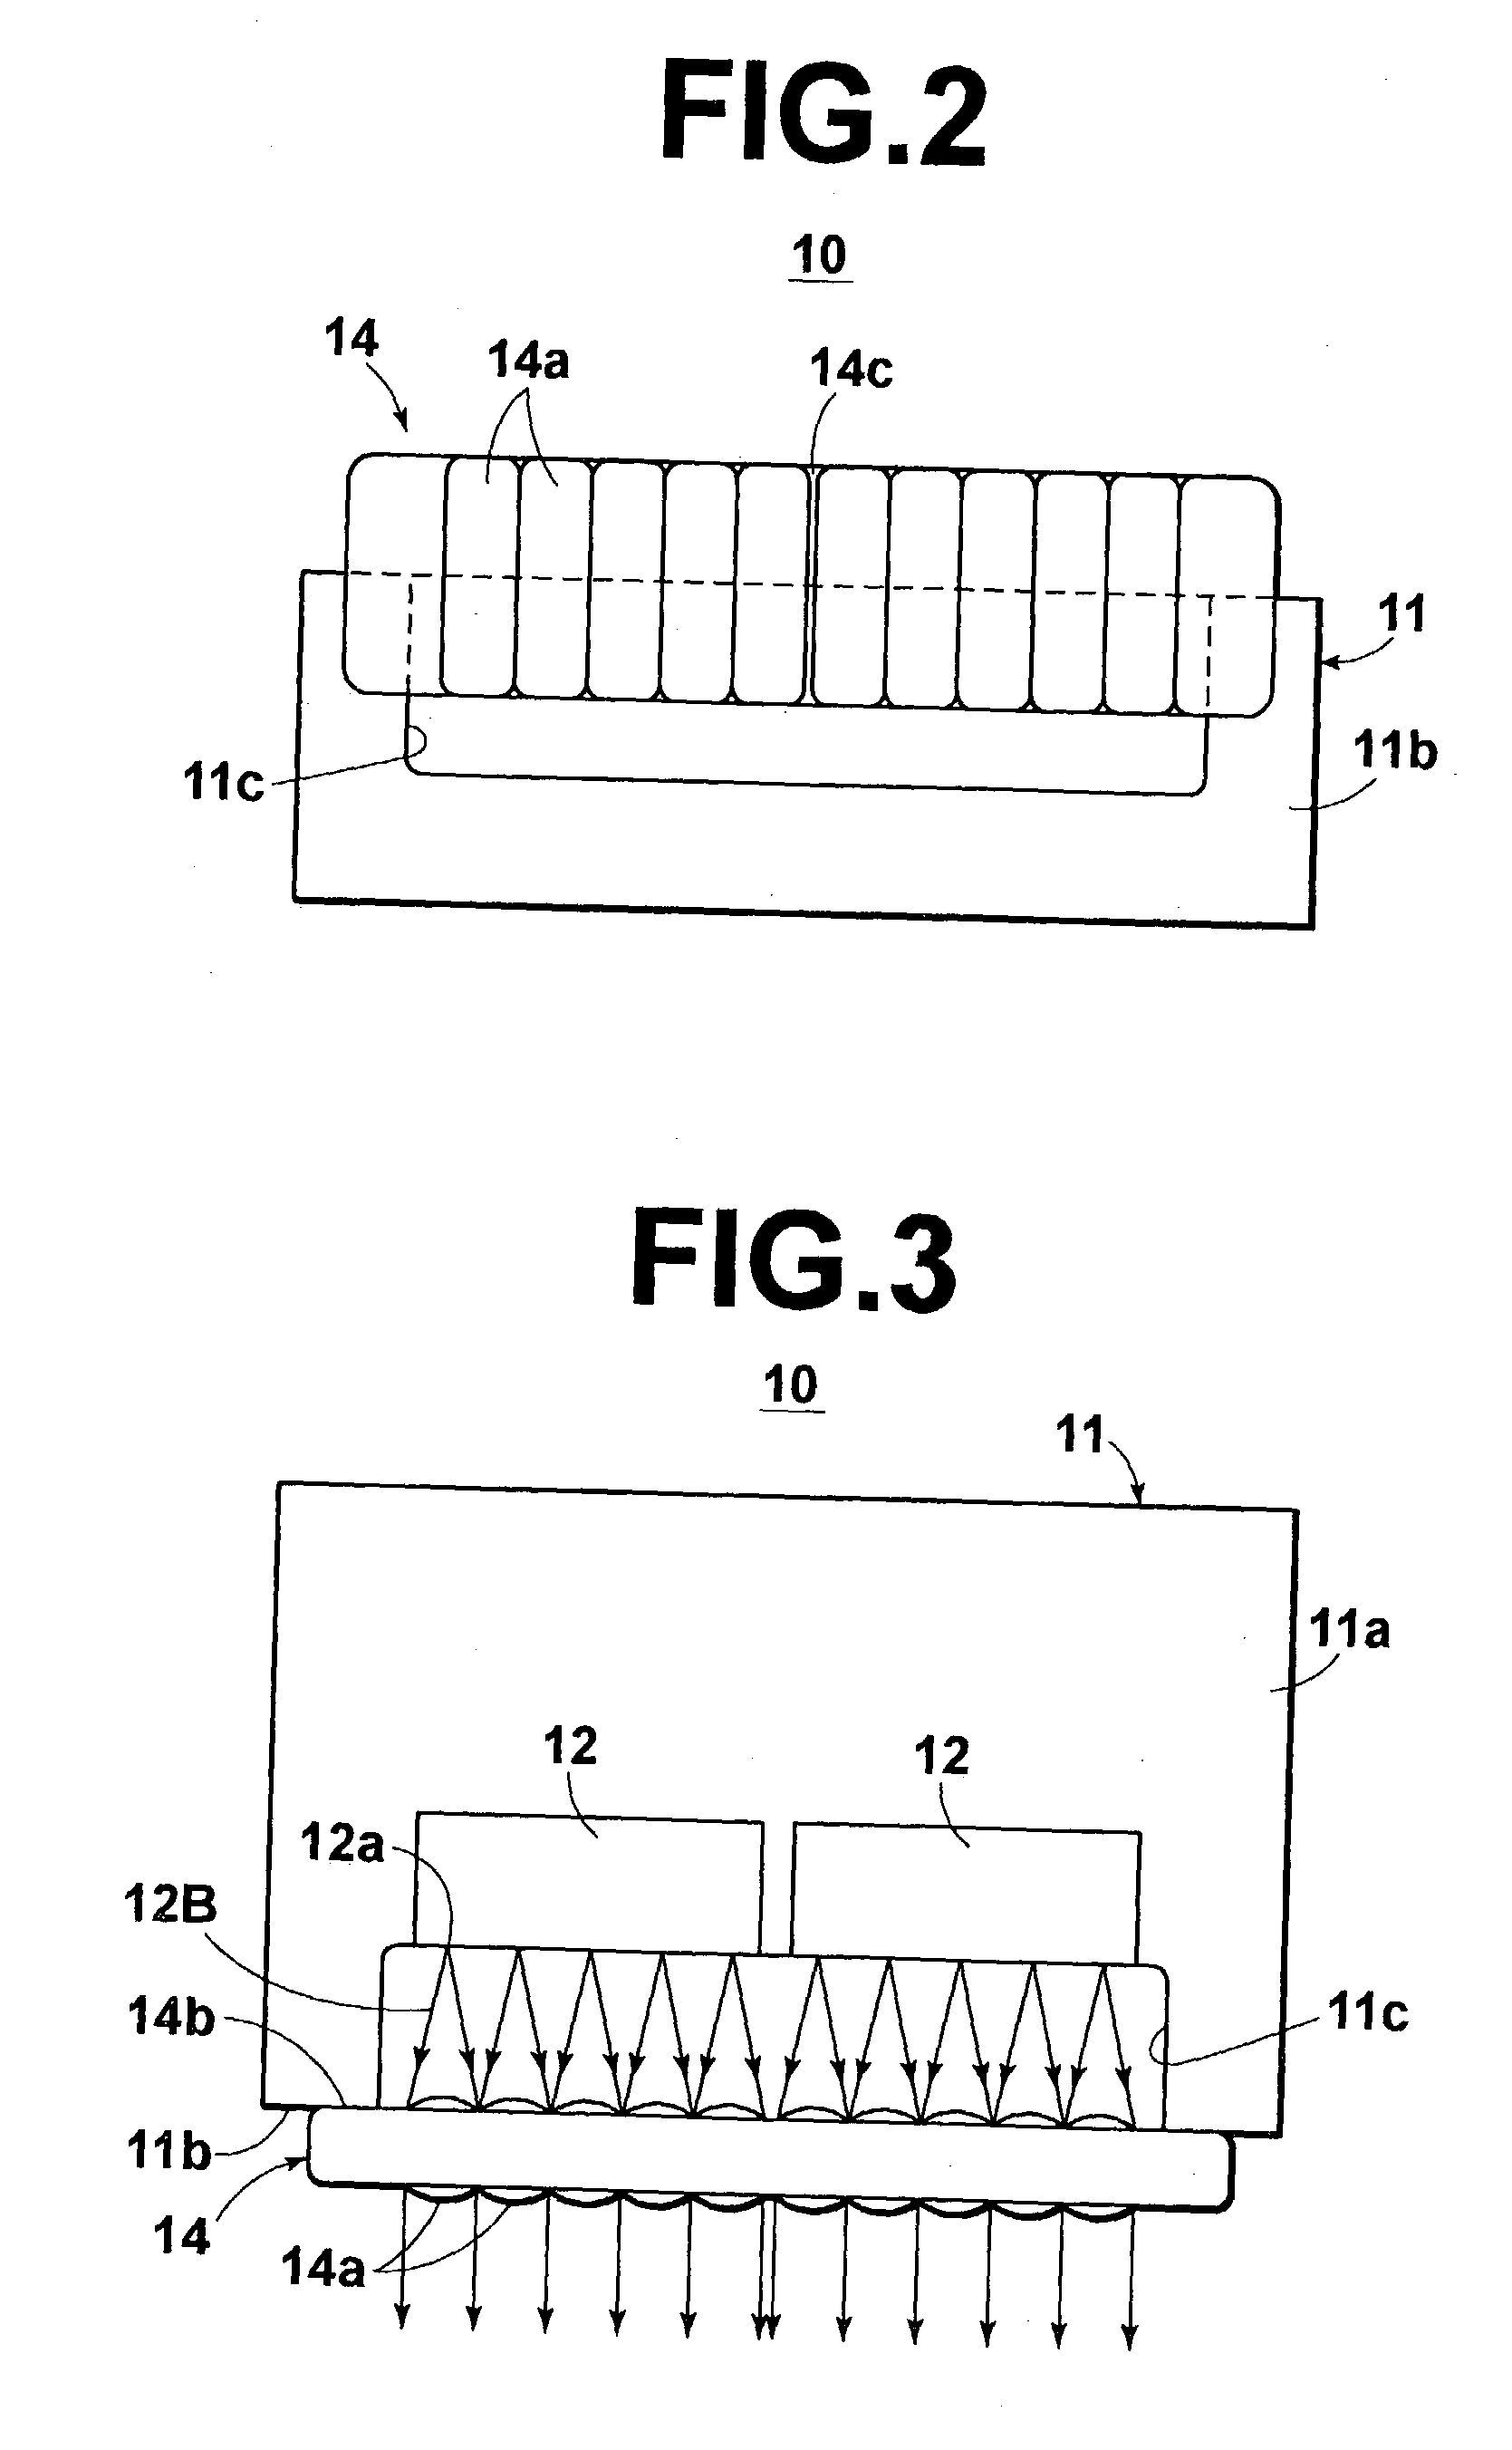 Laser apparatus in which laser diodes and corresponding collimator lenses are fixed to block, and fiber module in which laser apparatus is coupled to optical fiber